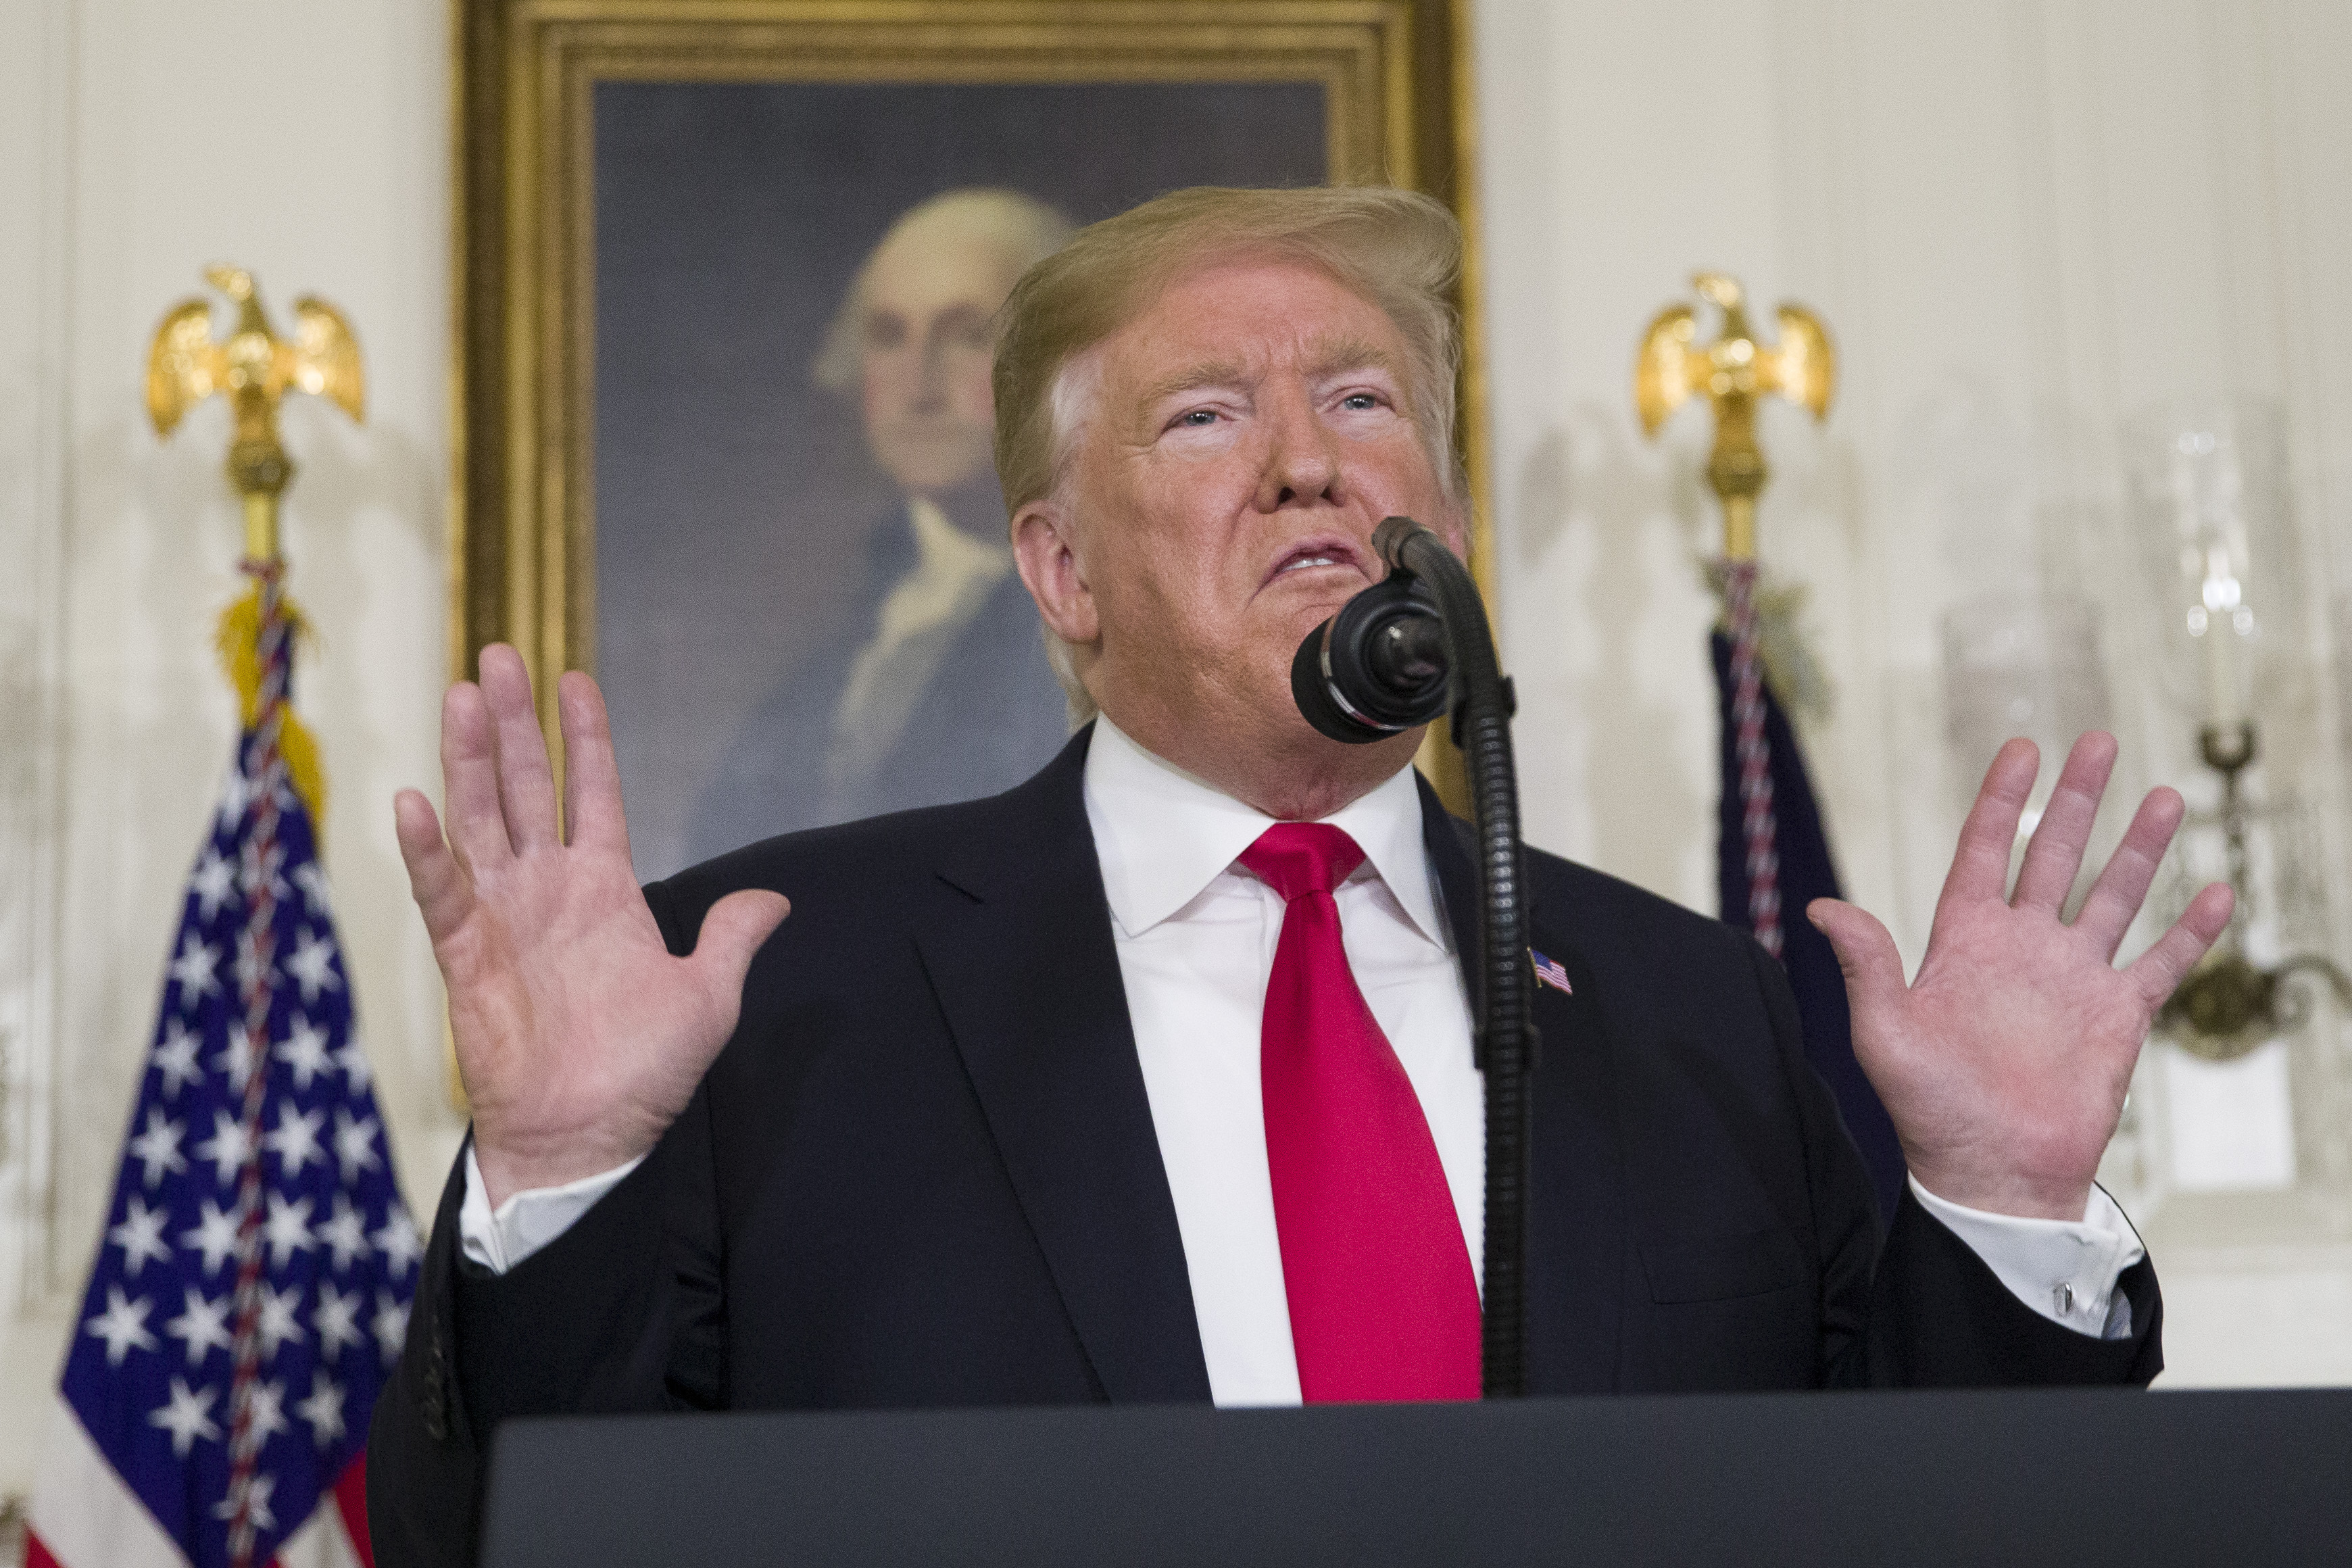 President Donald Trump speaks about the partial government shutdown, immigration and border security in the Diplomatic Reception Room of the White House in Washington on January 19.